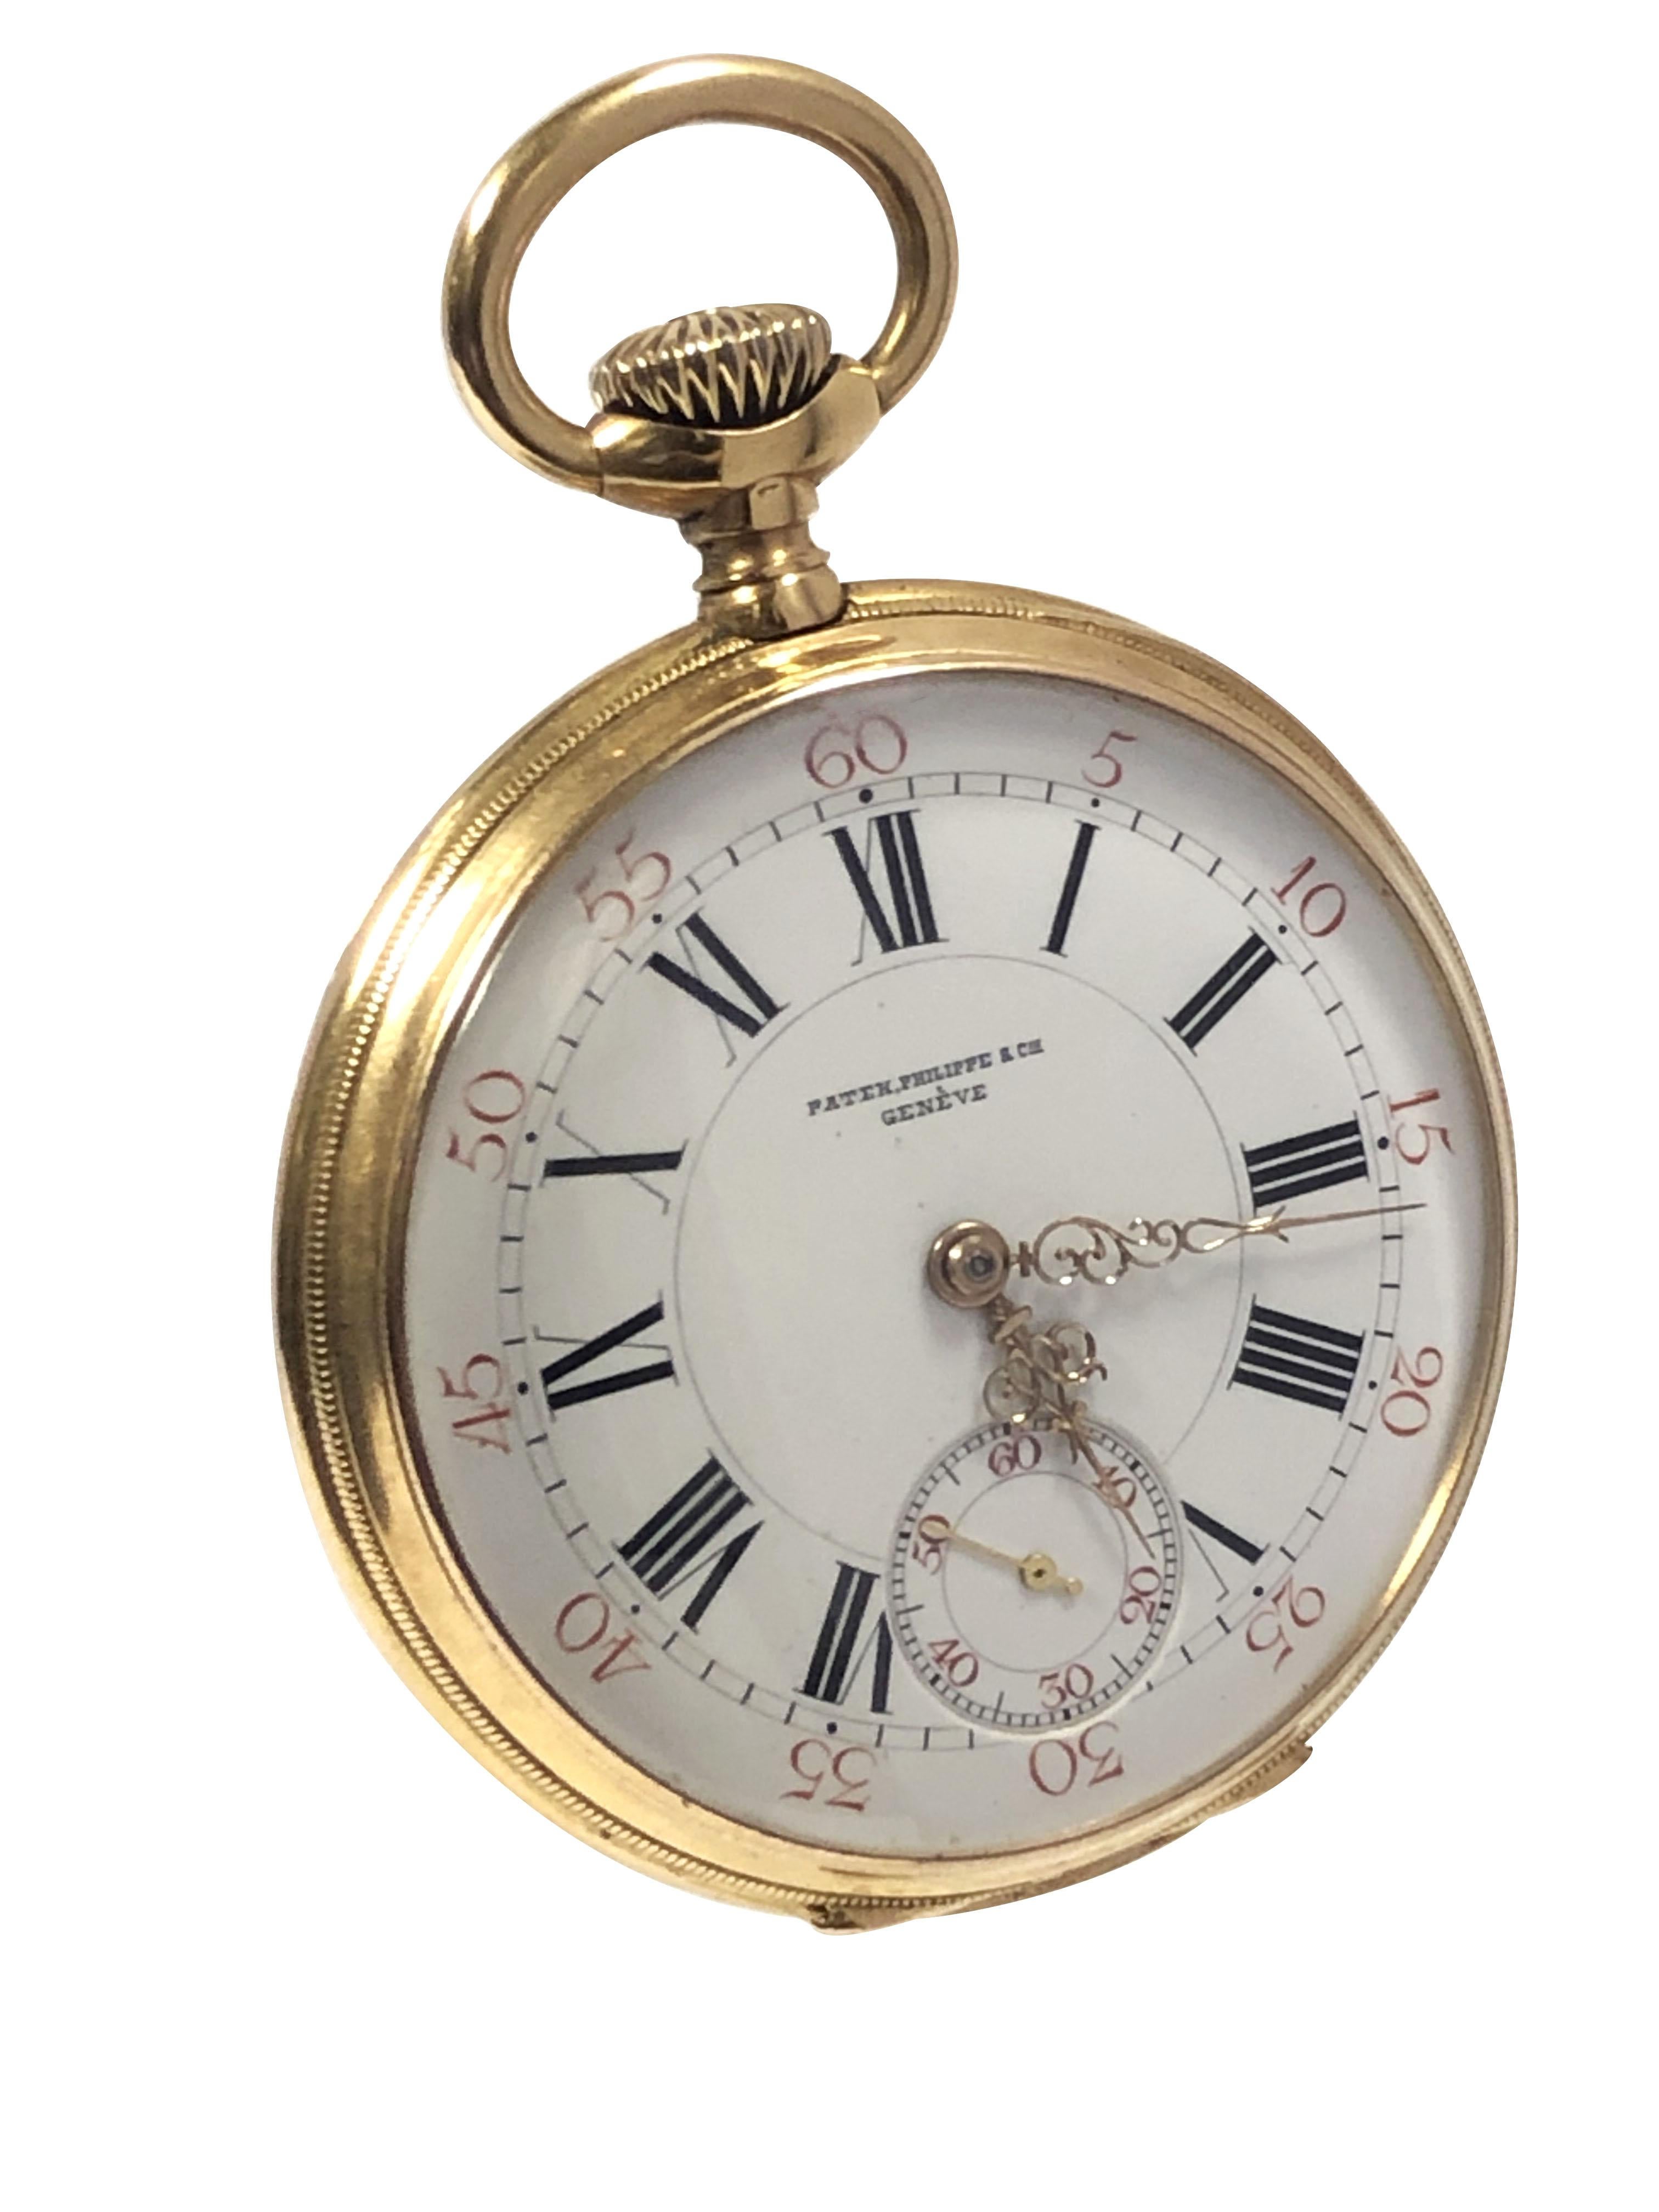 Circa 1900 Patek Philippe Pocket Watch, 46 M.M. 18k Yellow Gold 3 Piece case with Hinged Front and Back covers and an inside Dust cover, Jeweled Nickle Lever stem set and wound movement. Porcelain dial with Black Roman numerals, Red outer Track and